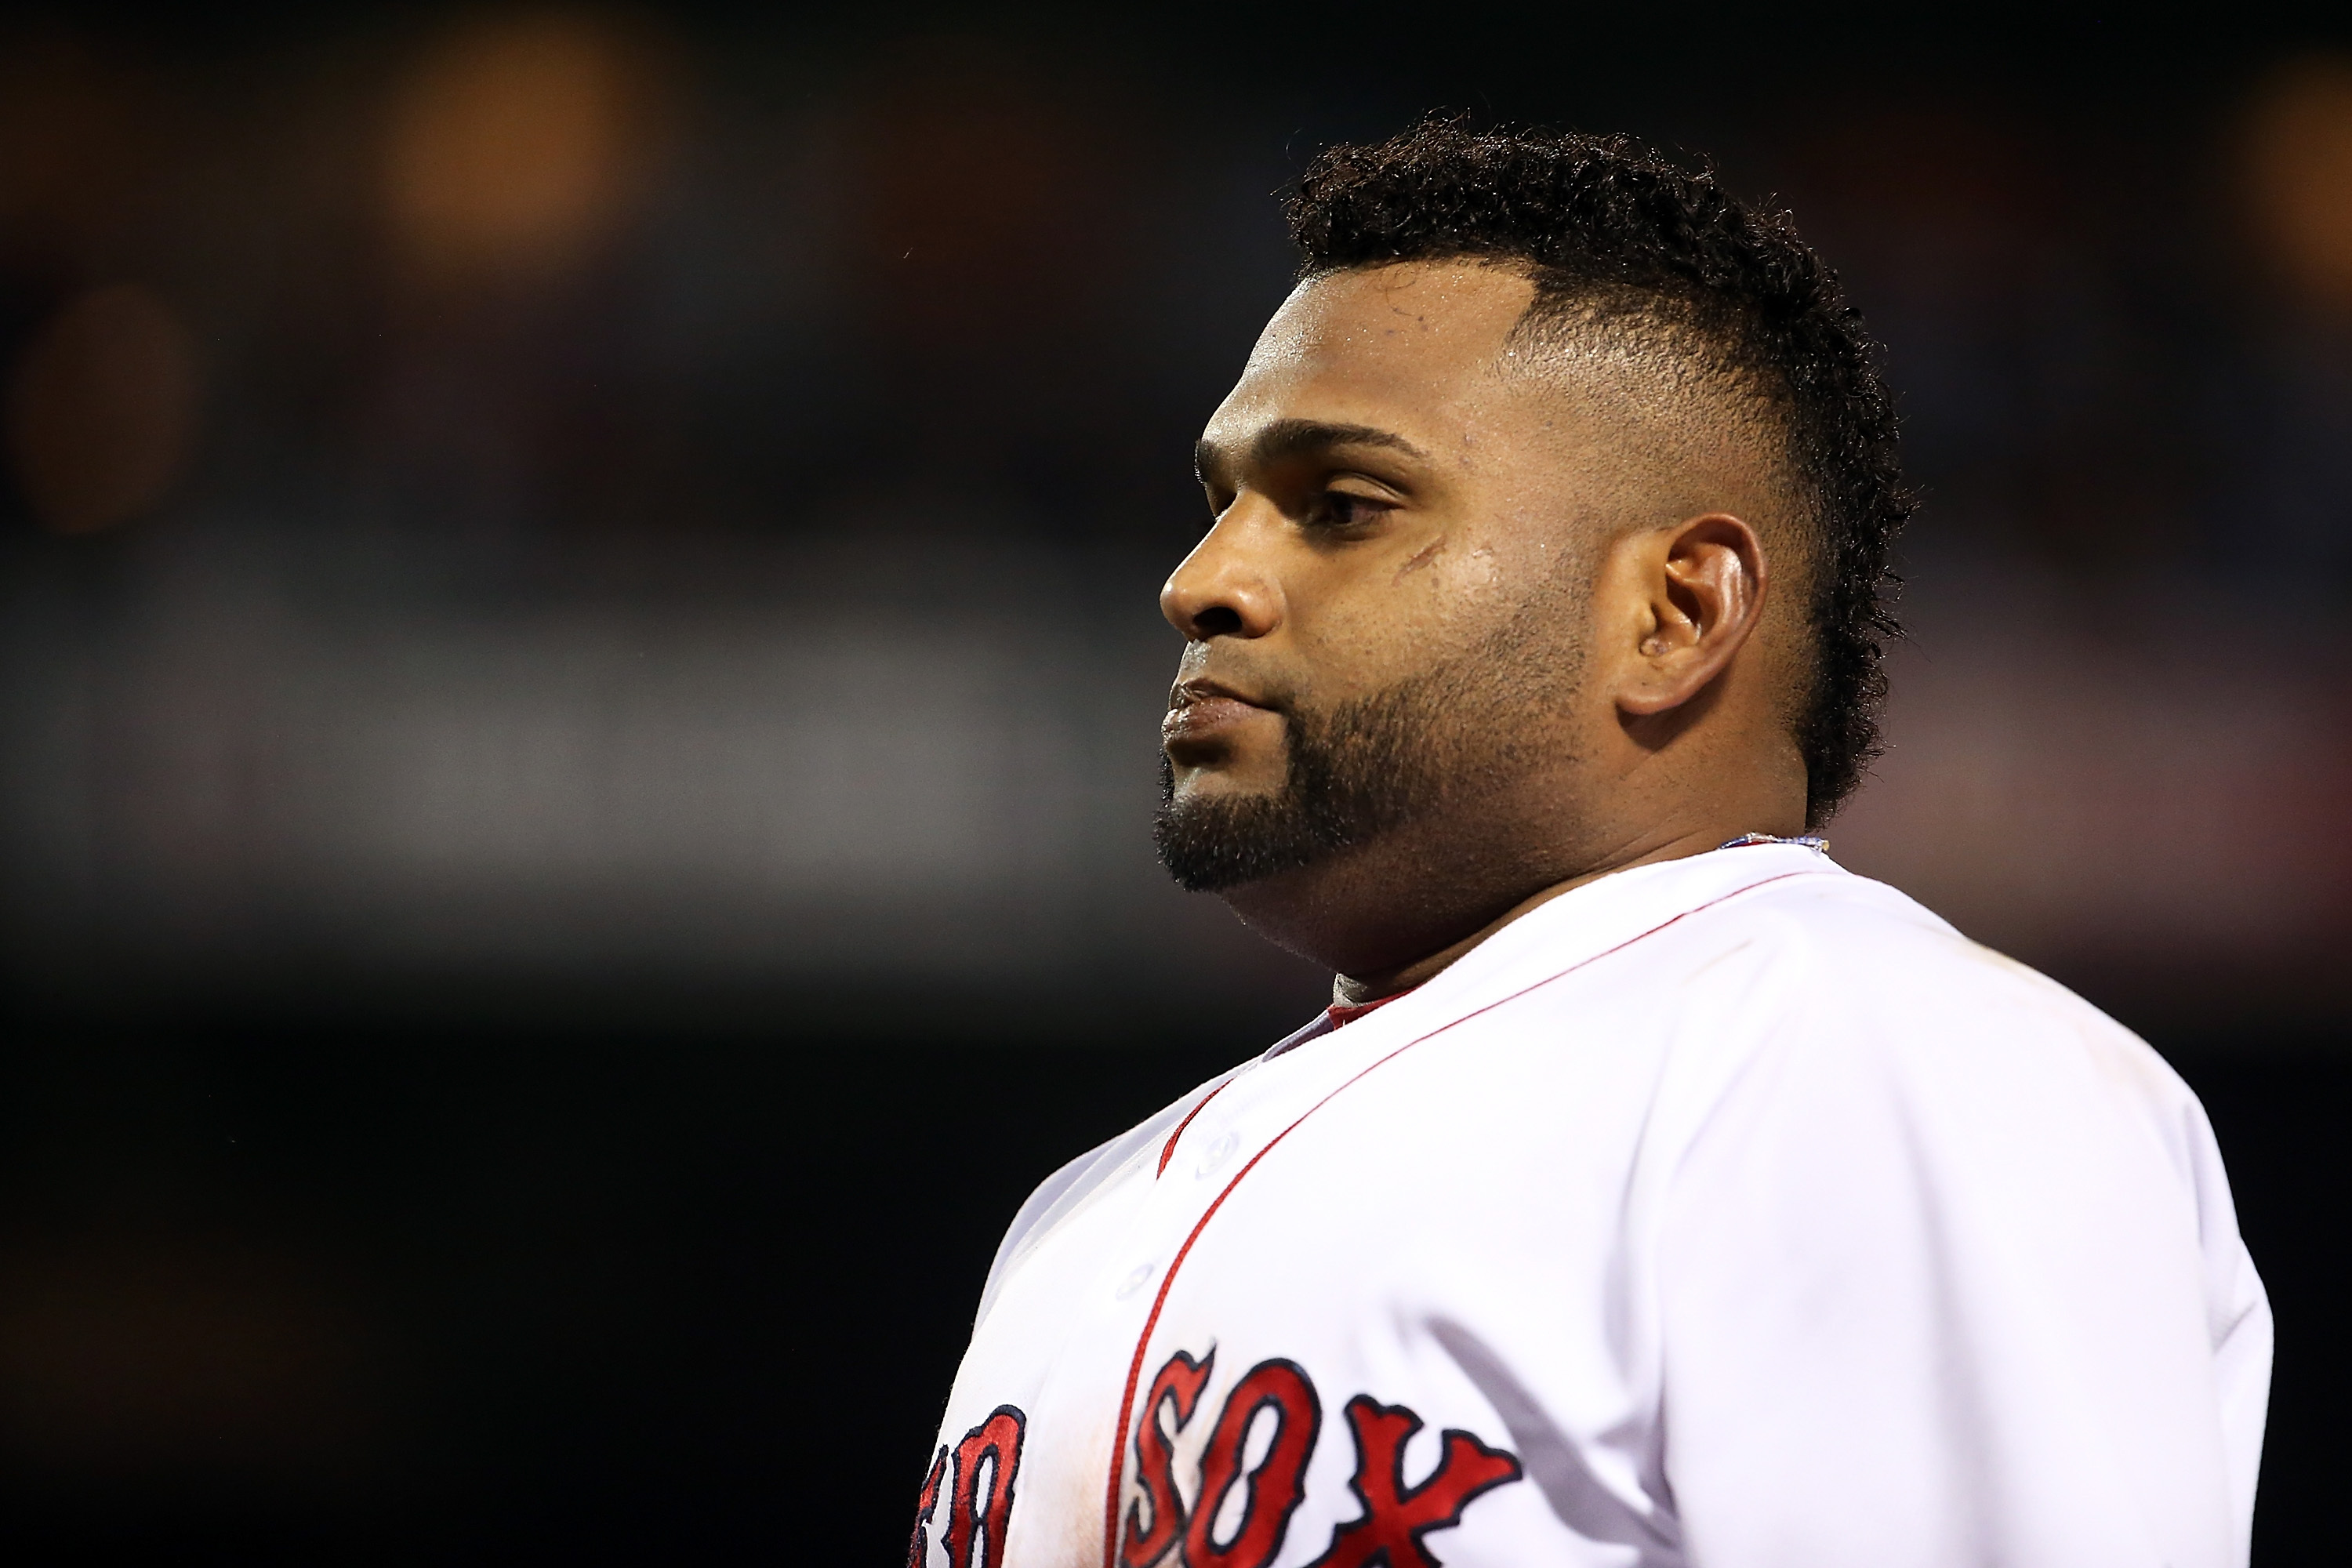 Pablo Sandoval regrets leaving Giants for Red Sox in 2014